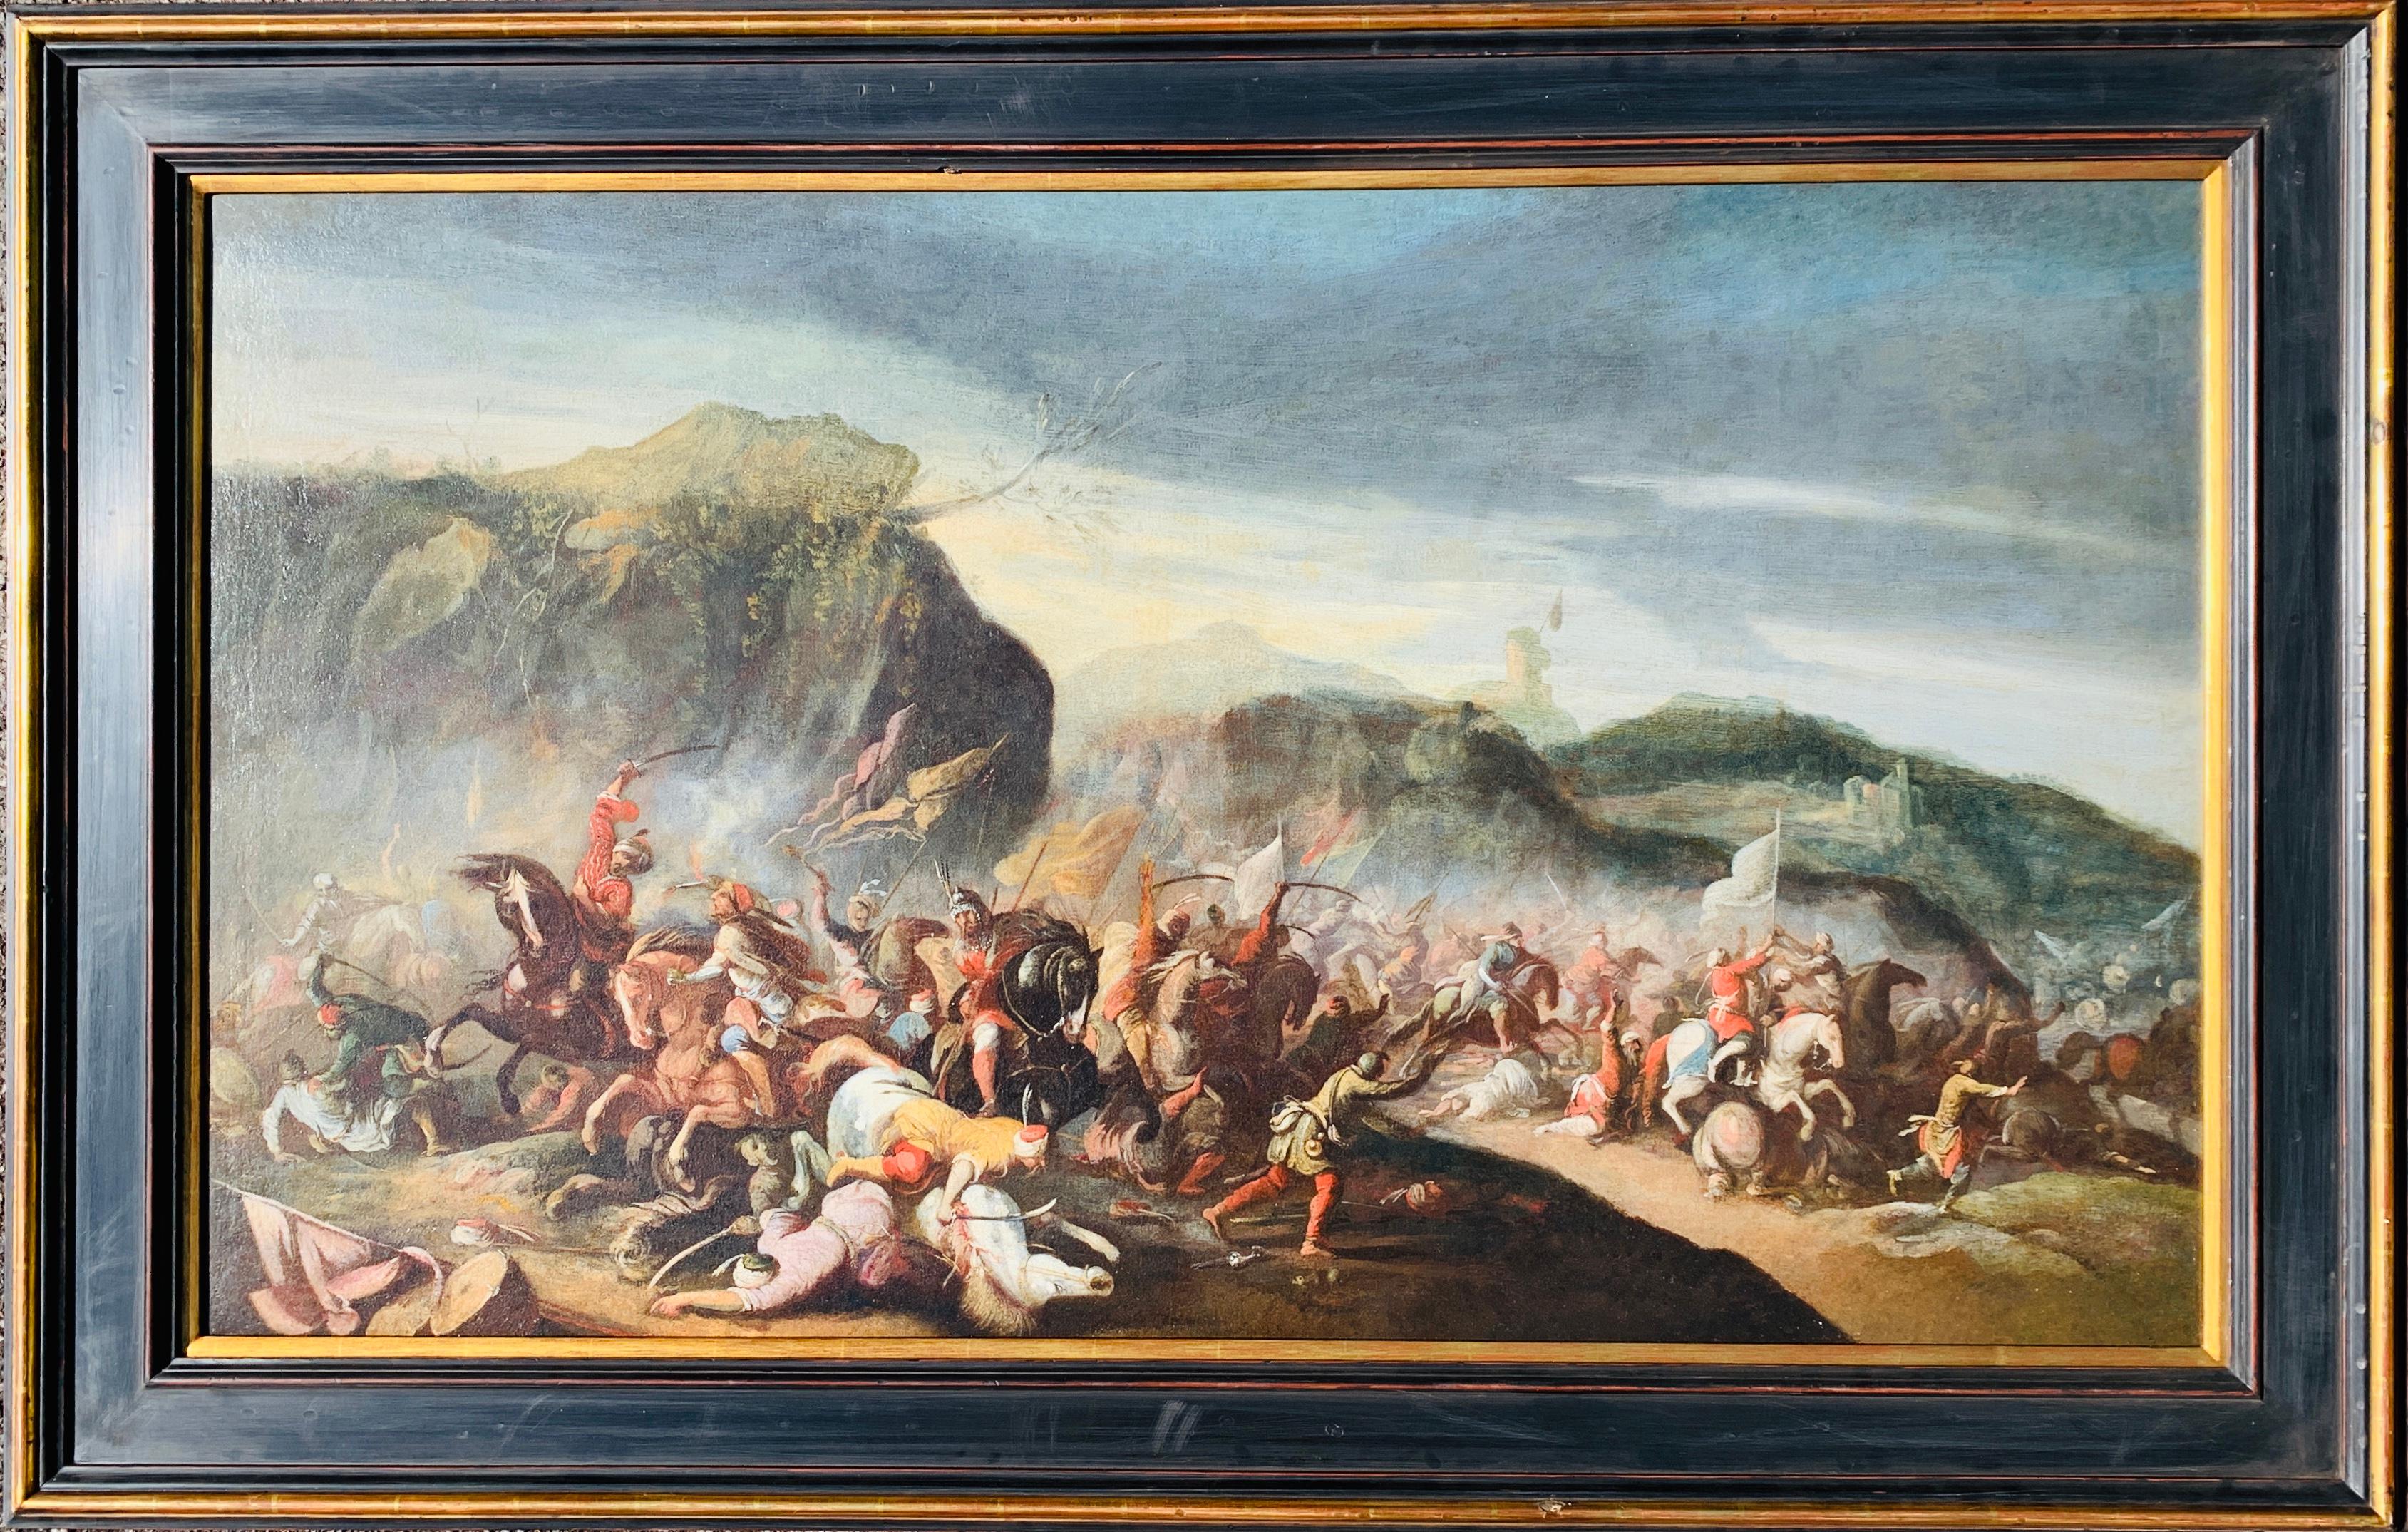 Jacques Courtois Figurative Painting - 17th century Italian Horse Battle scene between Crusaders and their enemy